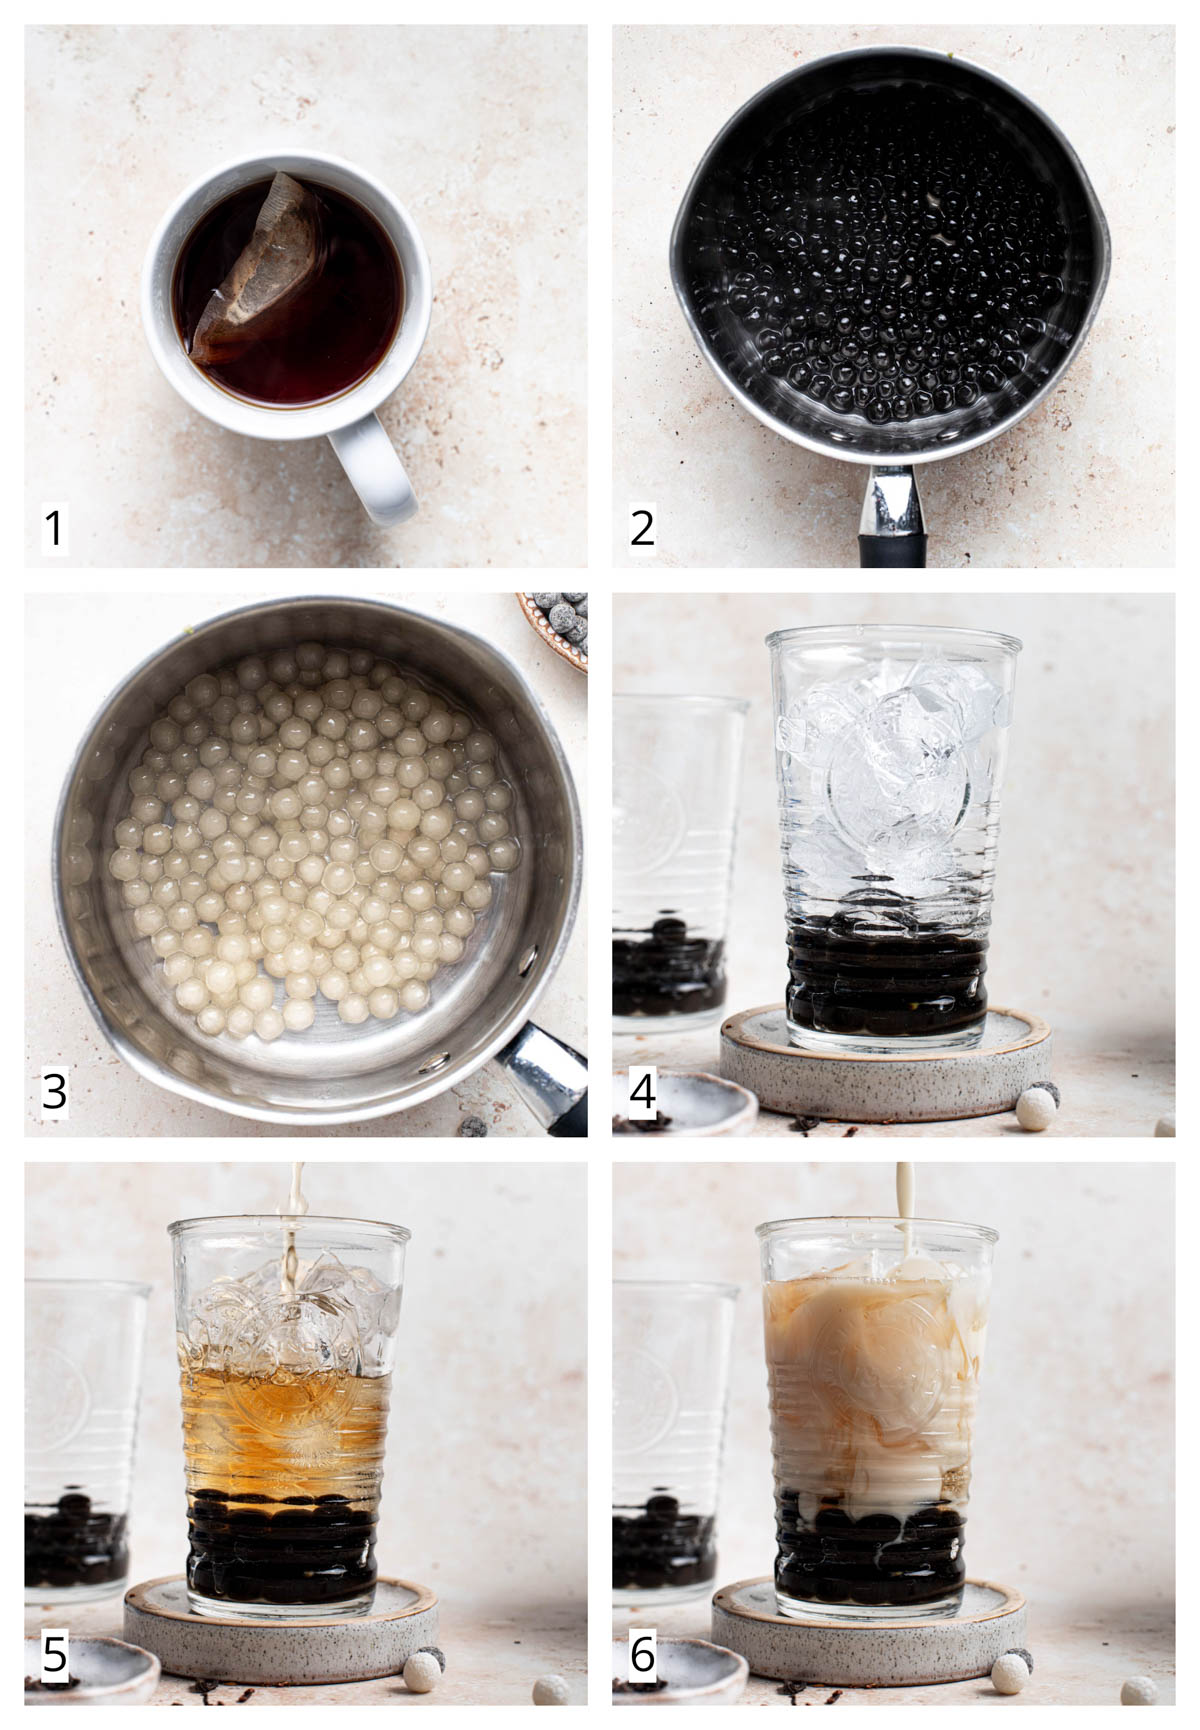 A collage of six images showing the six steps of making bubble milk tea.